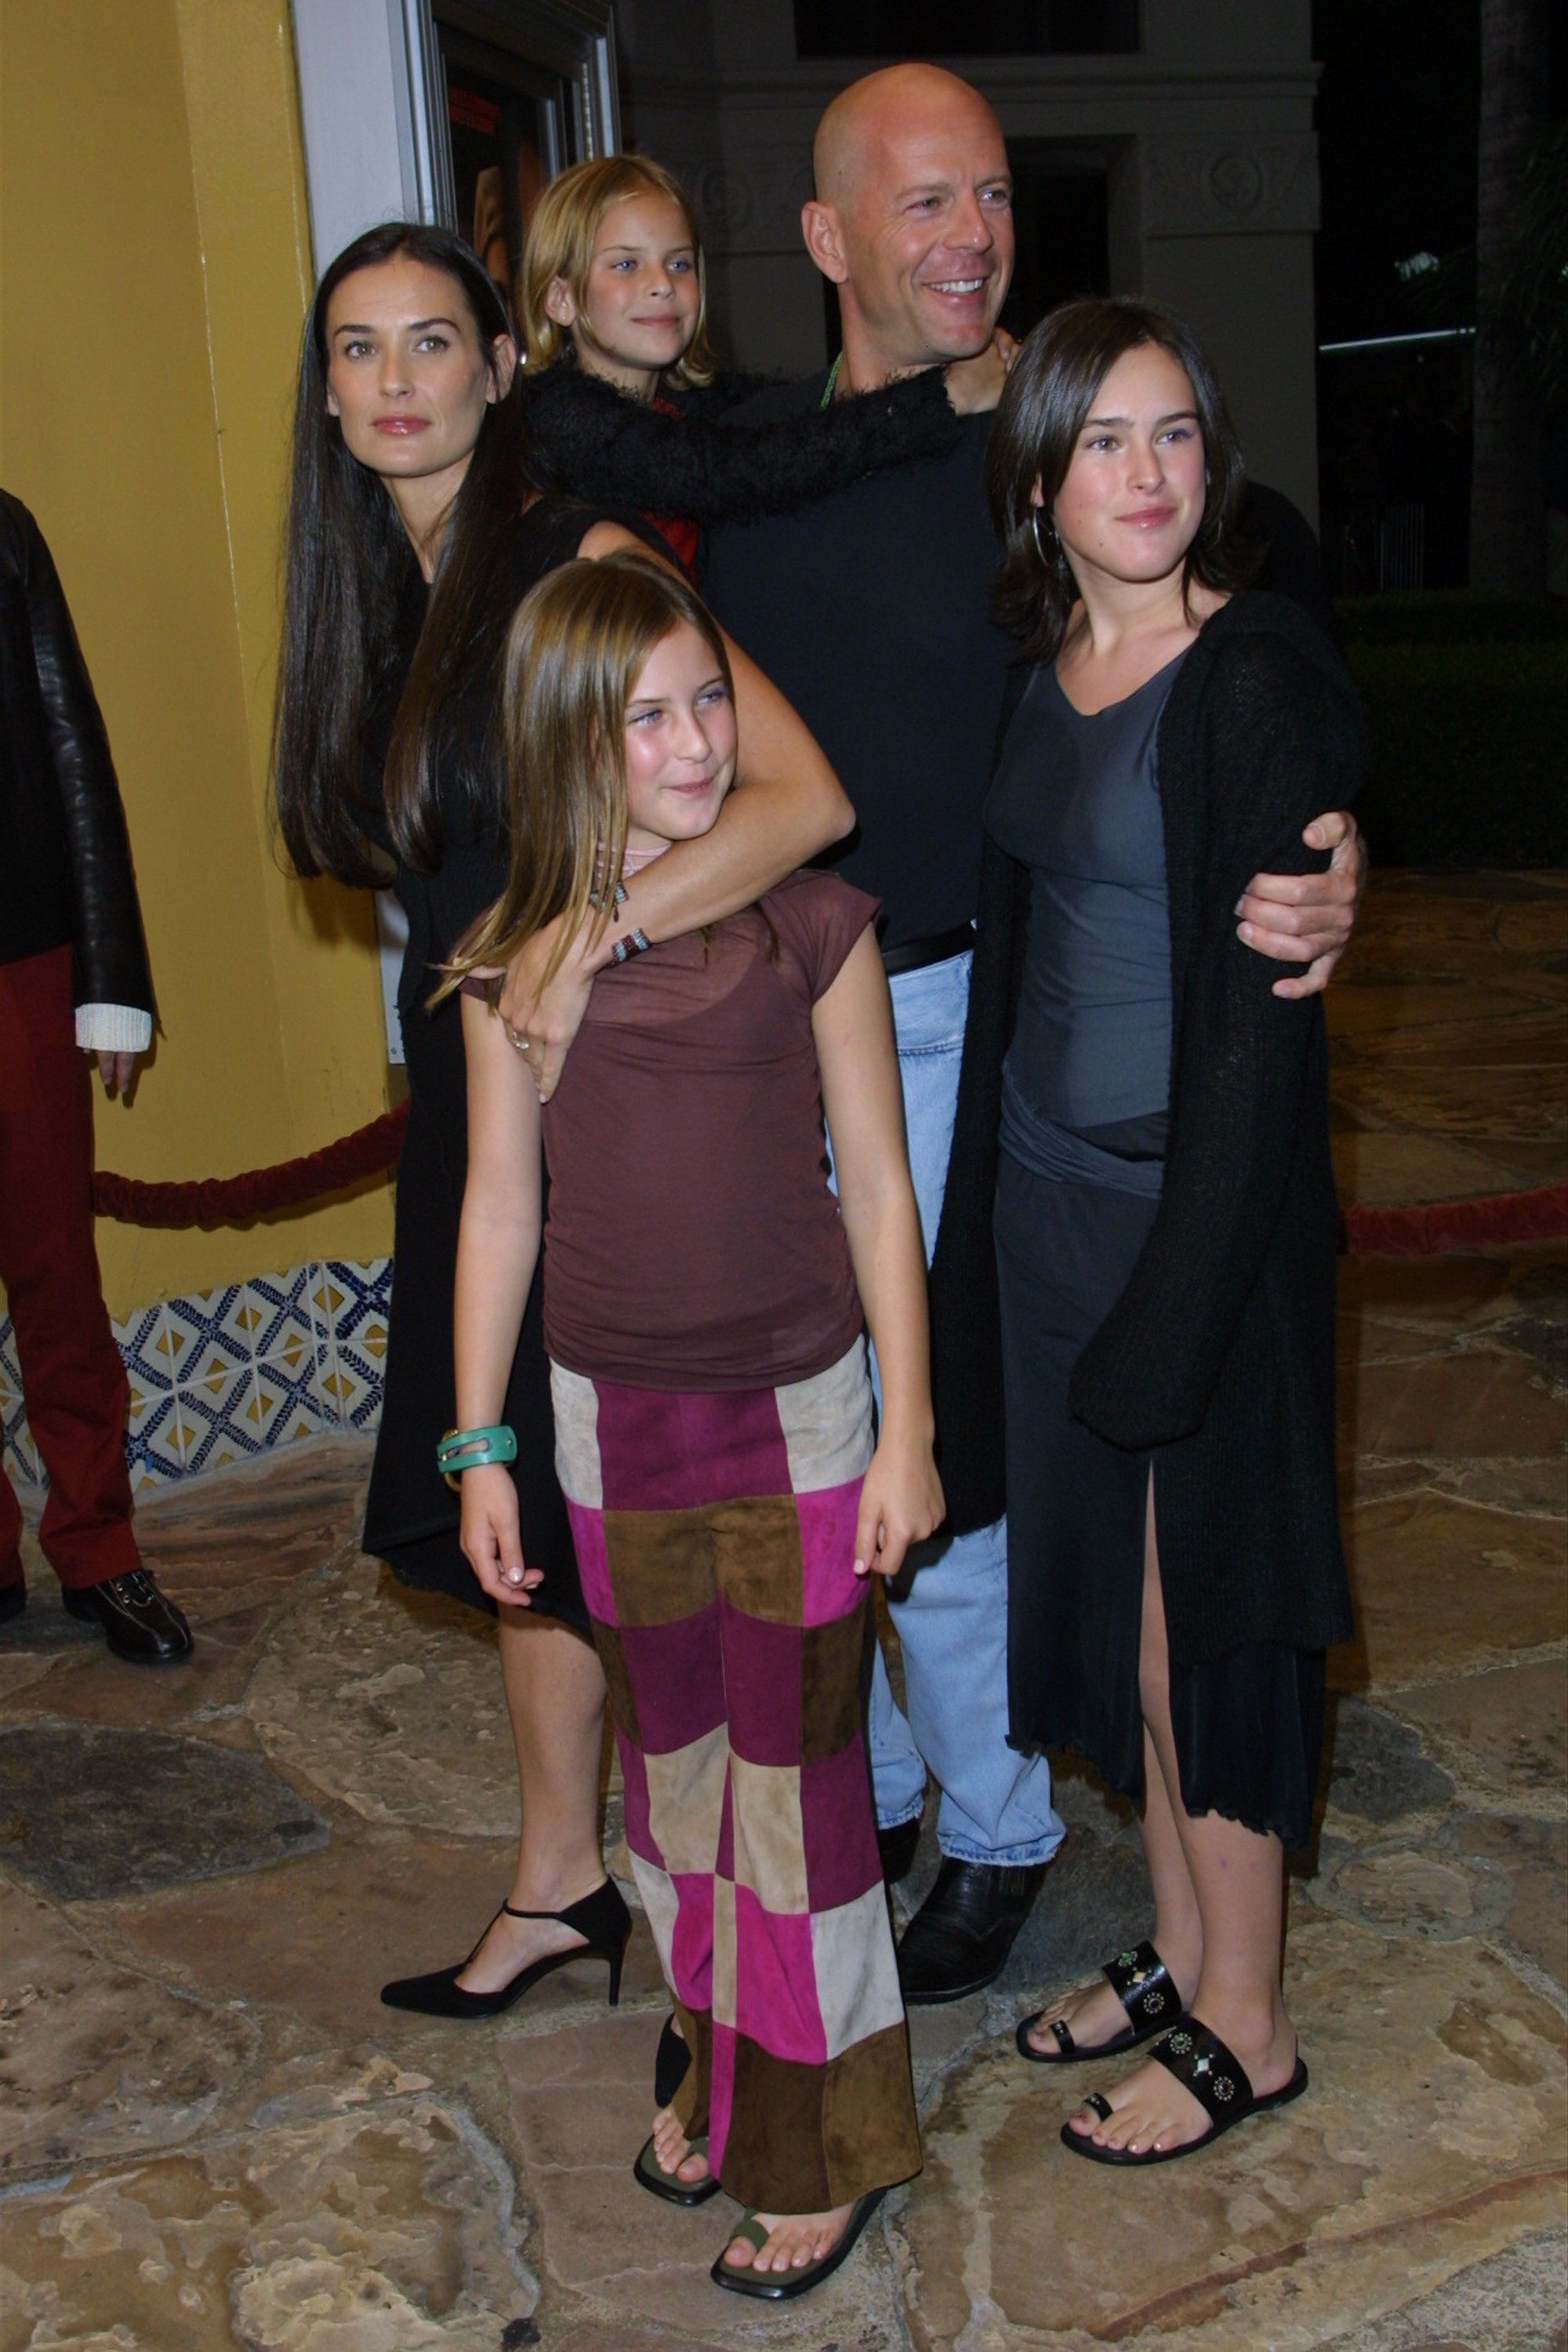 Demi Moore and Bruce Willis with their daughters Rumer, Scout, and Tallulah Willis at the premiere of the film "Bandits" on October 4, 2001, in Westwood, California. | Source: Jason Kirk/Getty Images